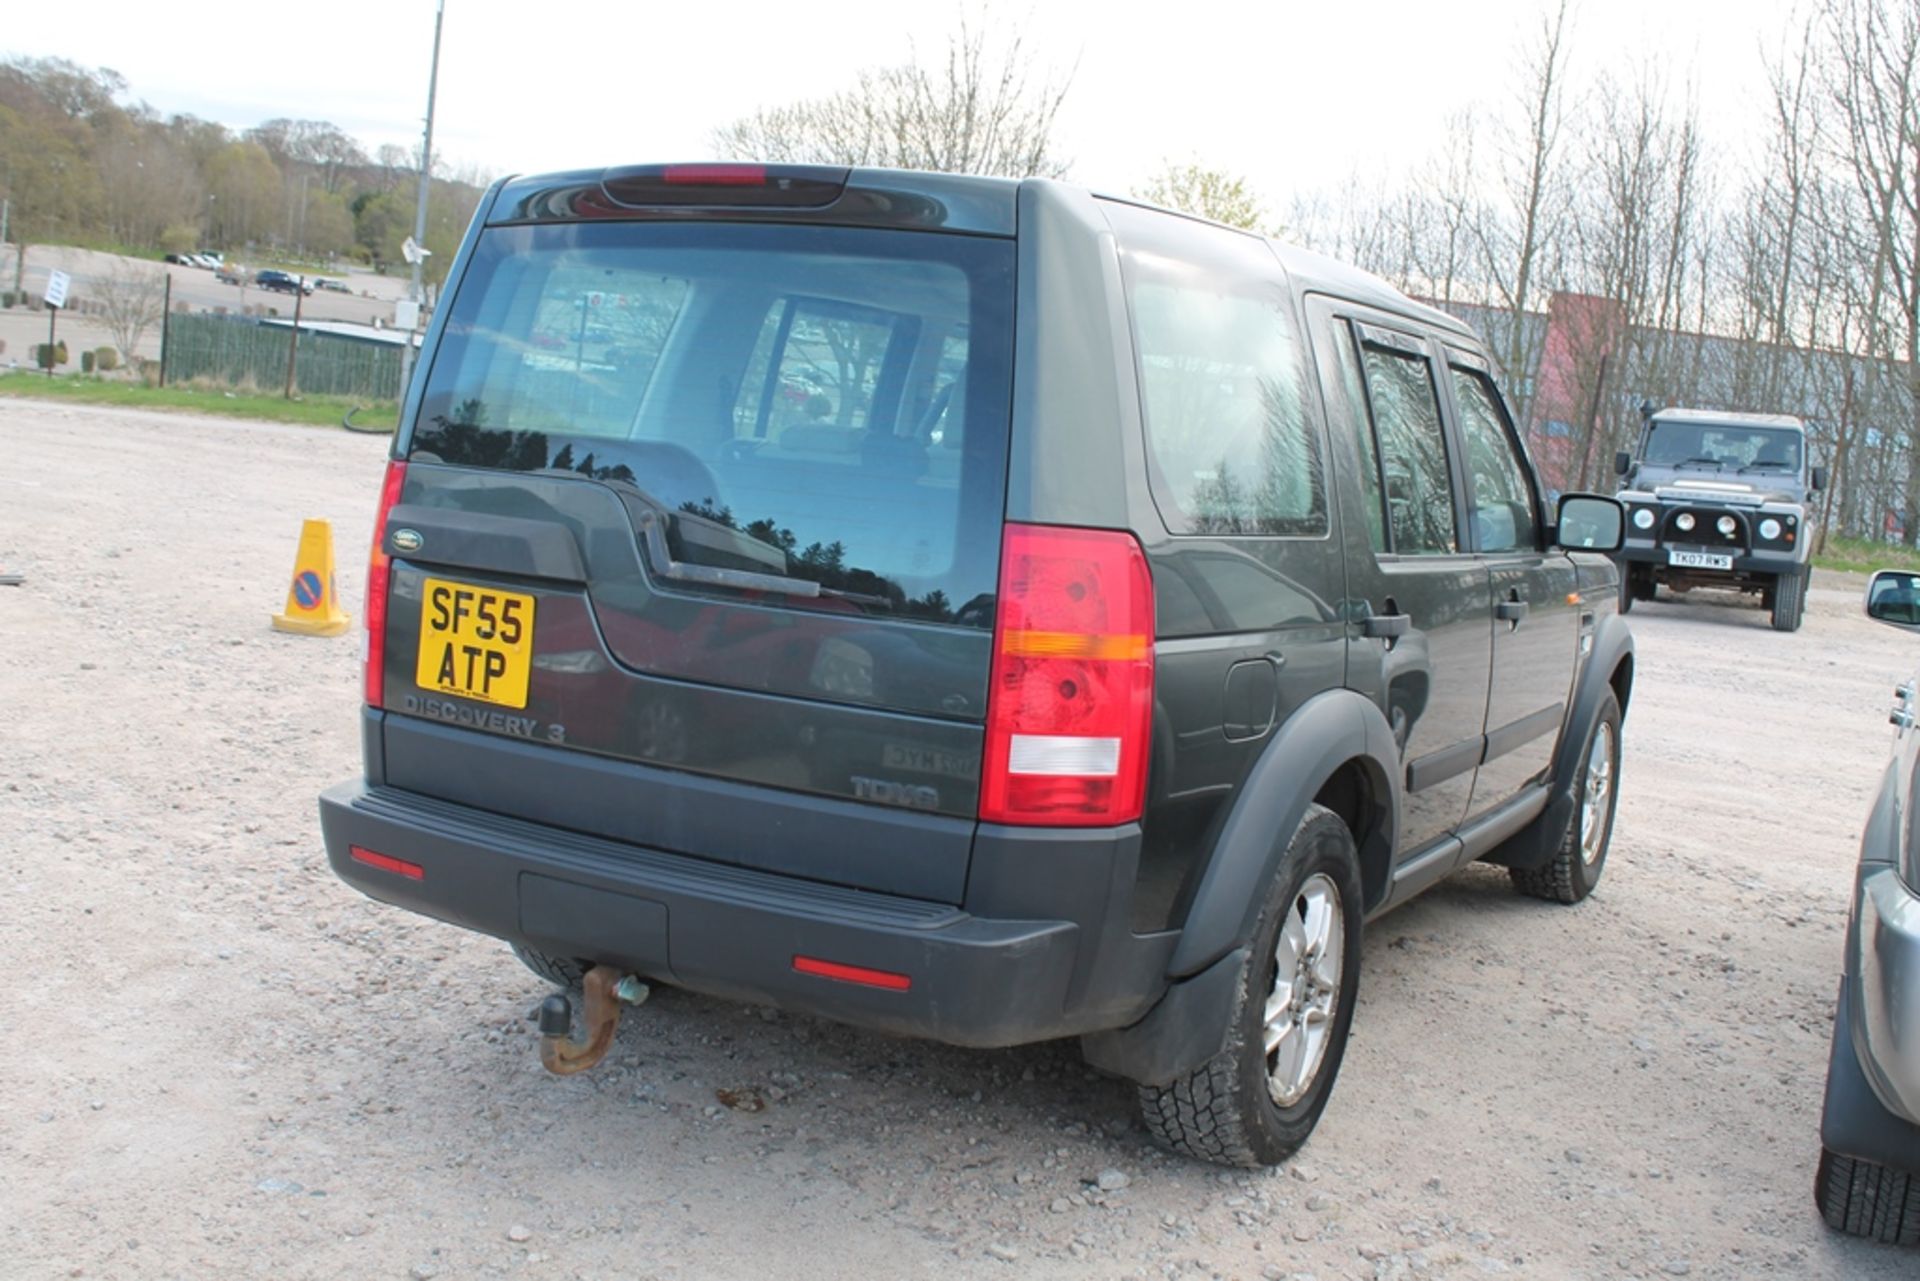 Land Rover Discovery 3 Tdv6 - 2720cc 5 Door Estate - Image 4 of 4